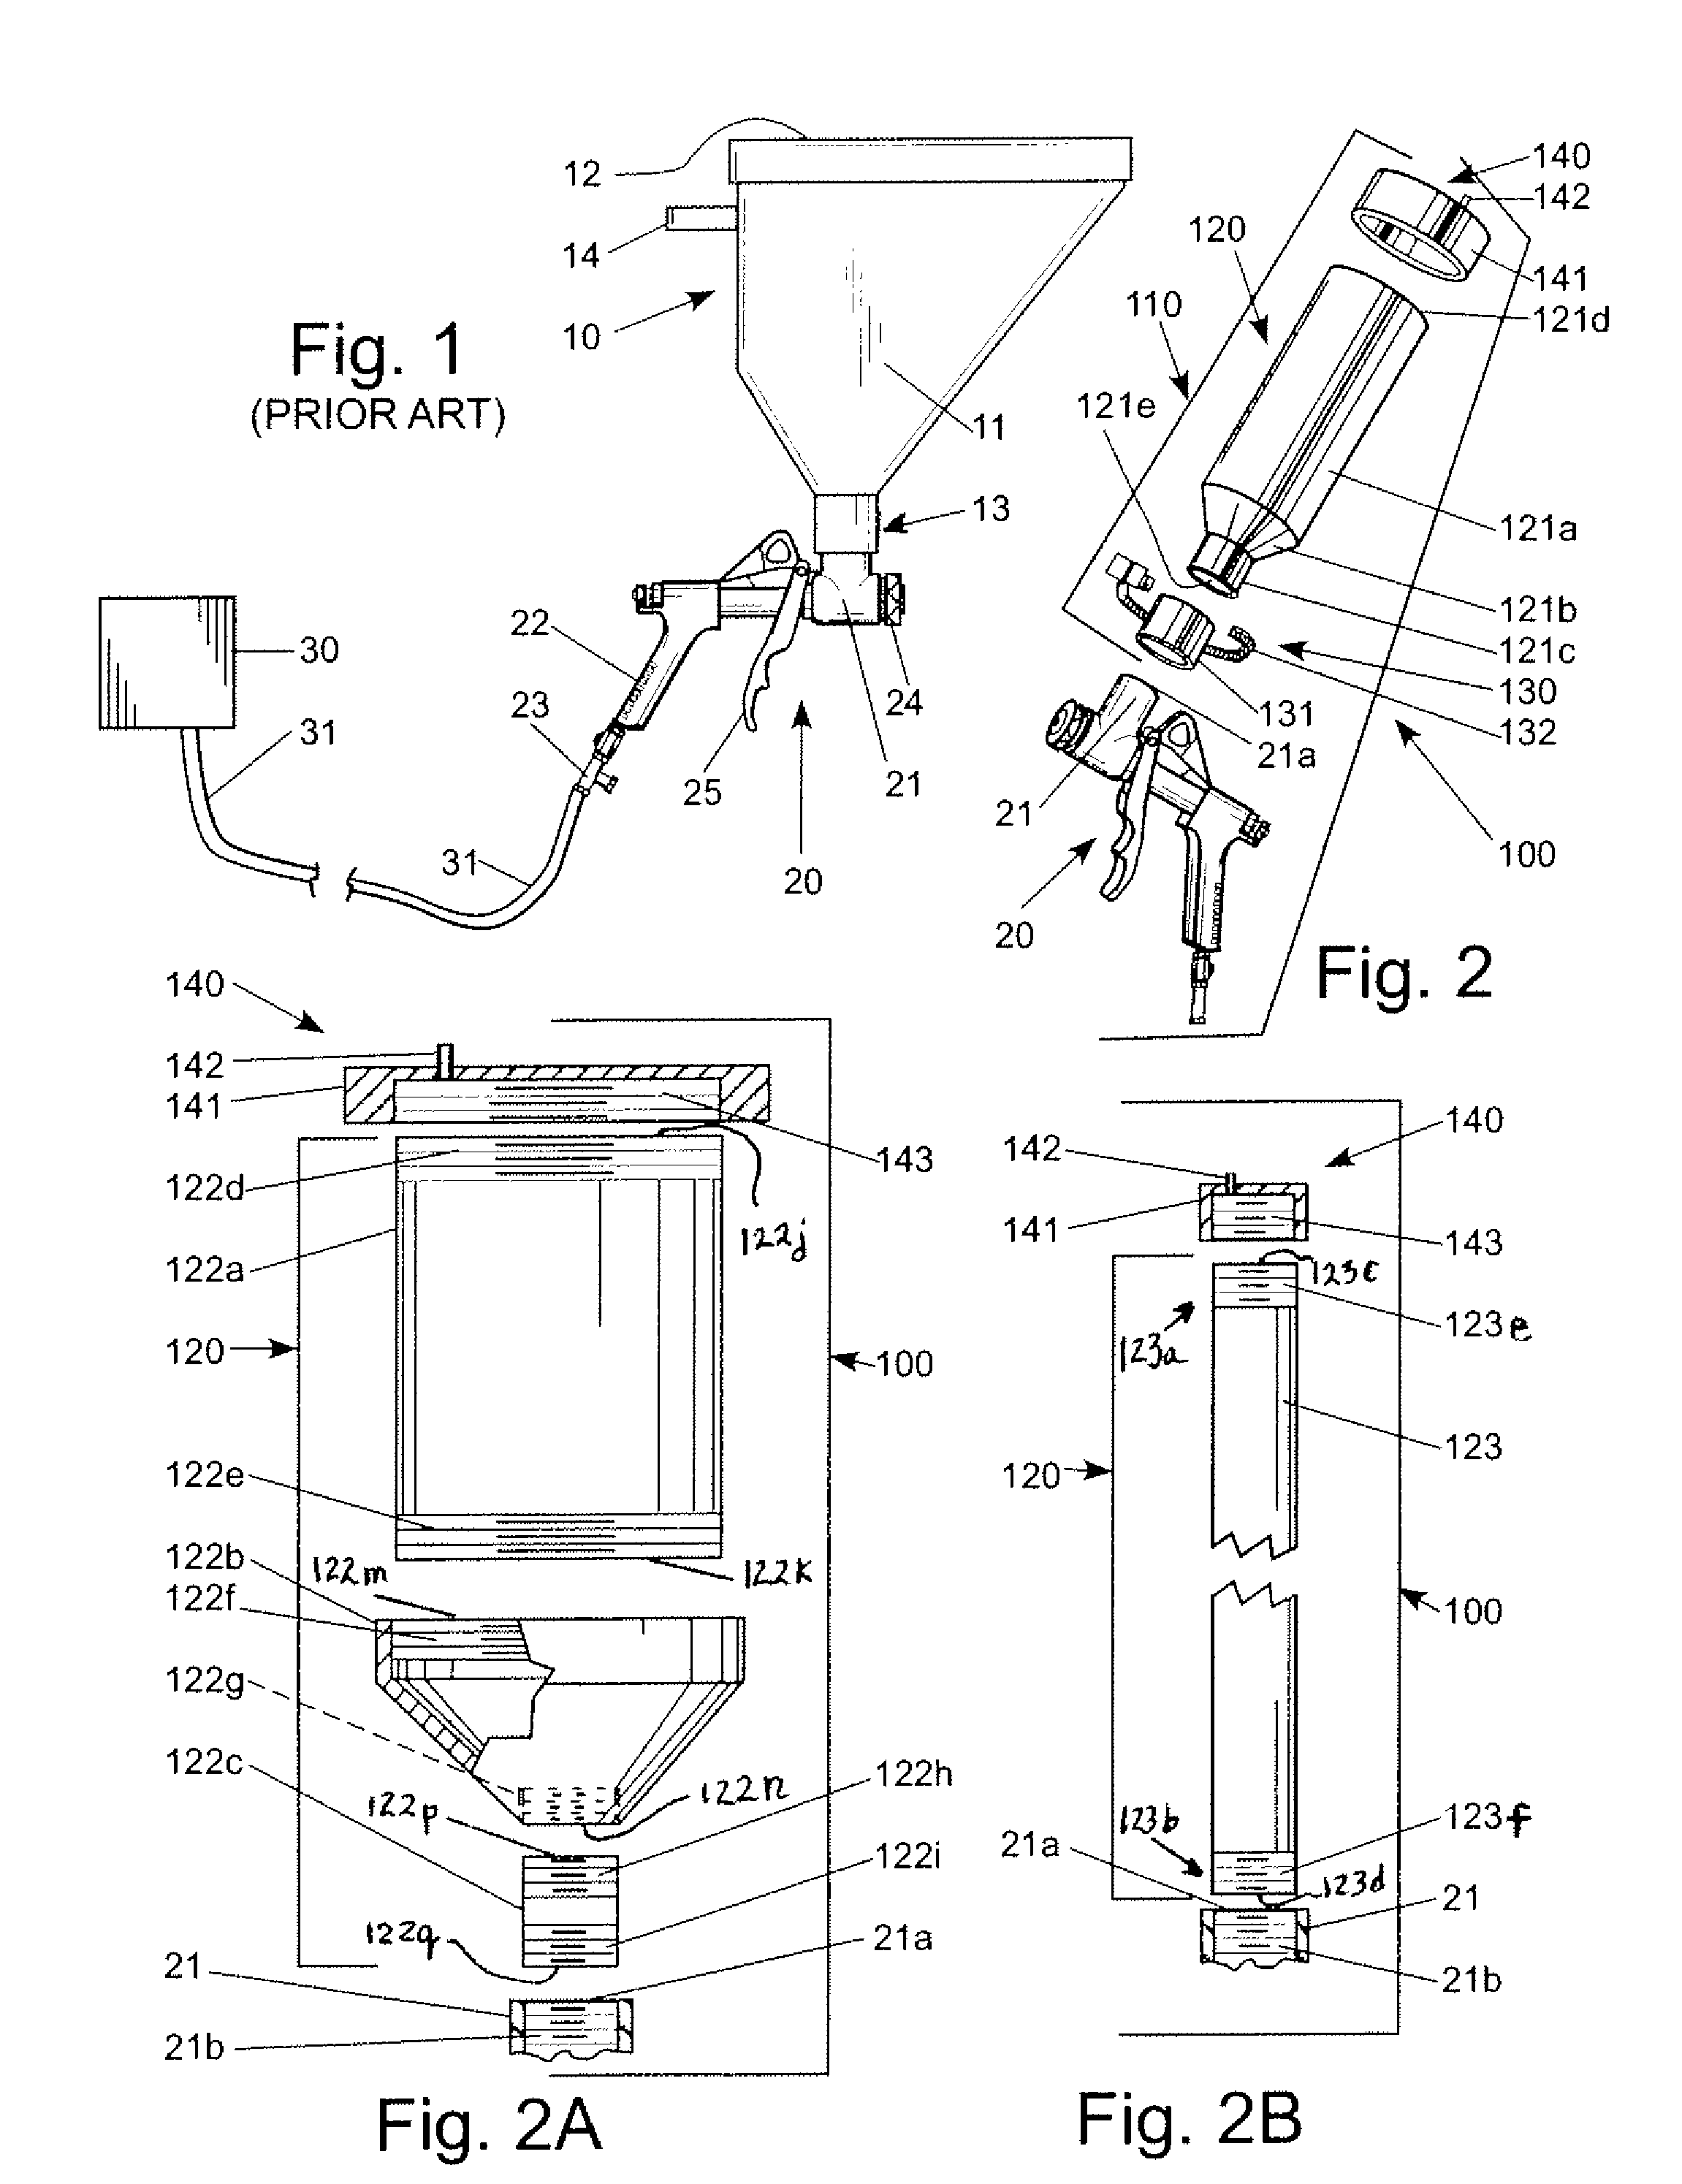 Hopper-type texture spray apparatus and hopper assembly therefor